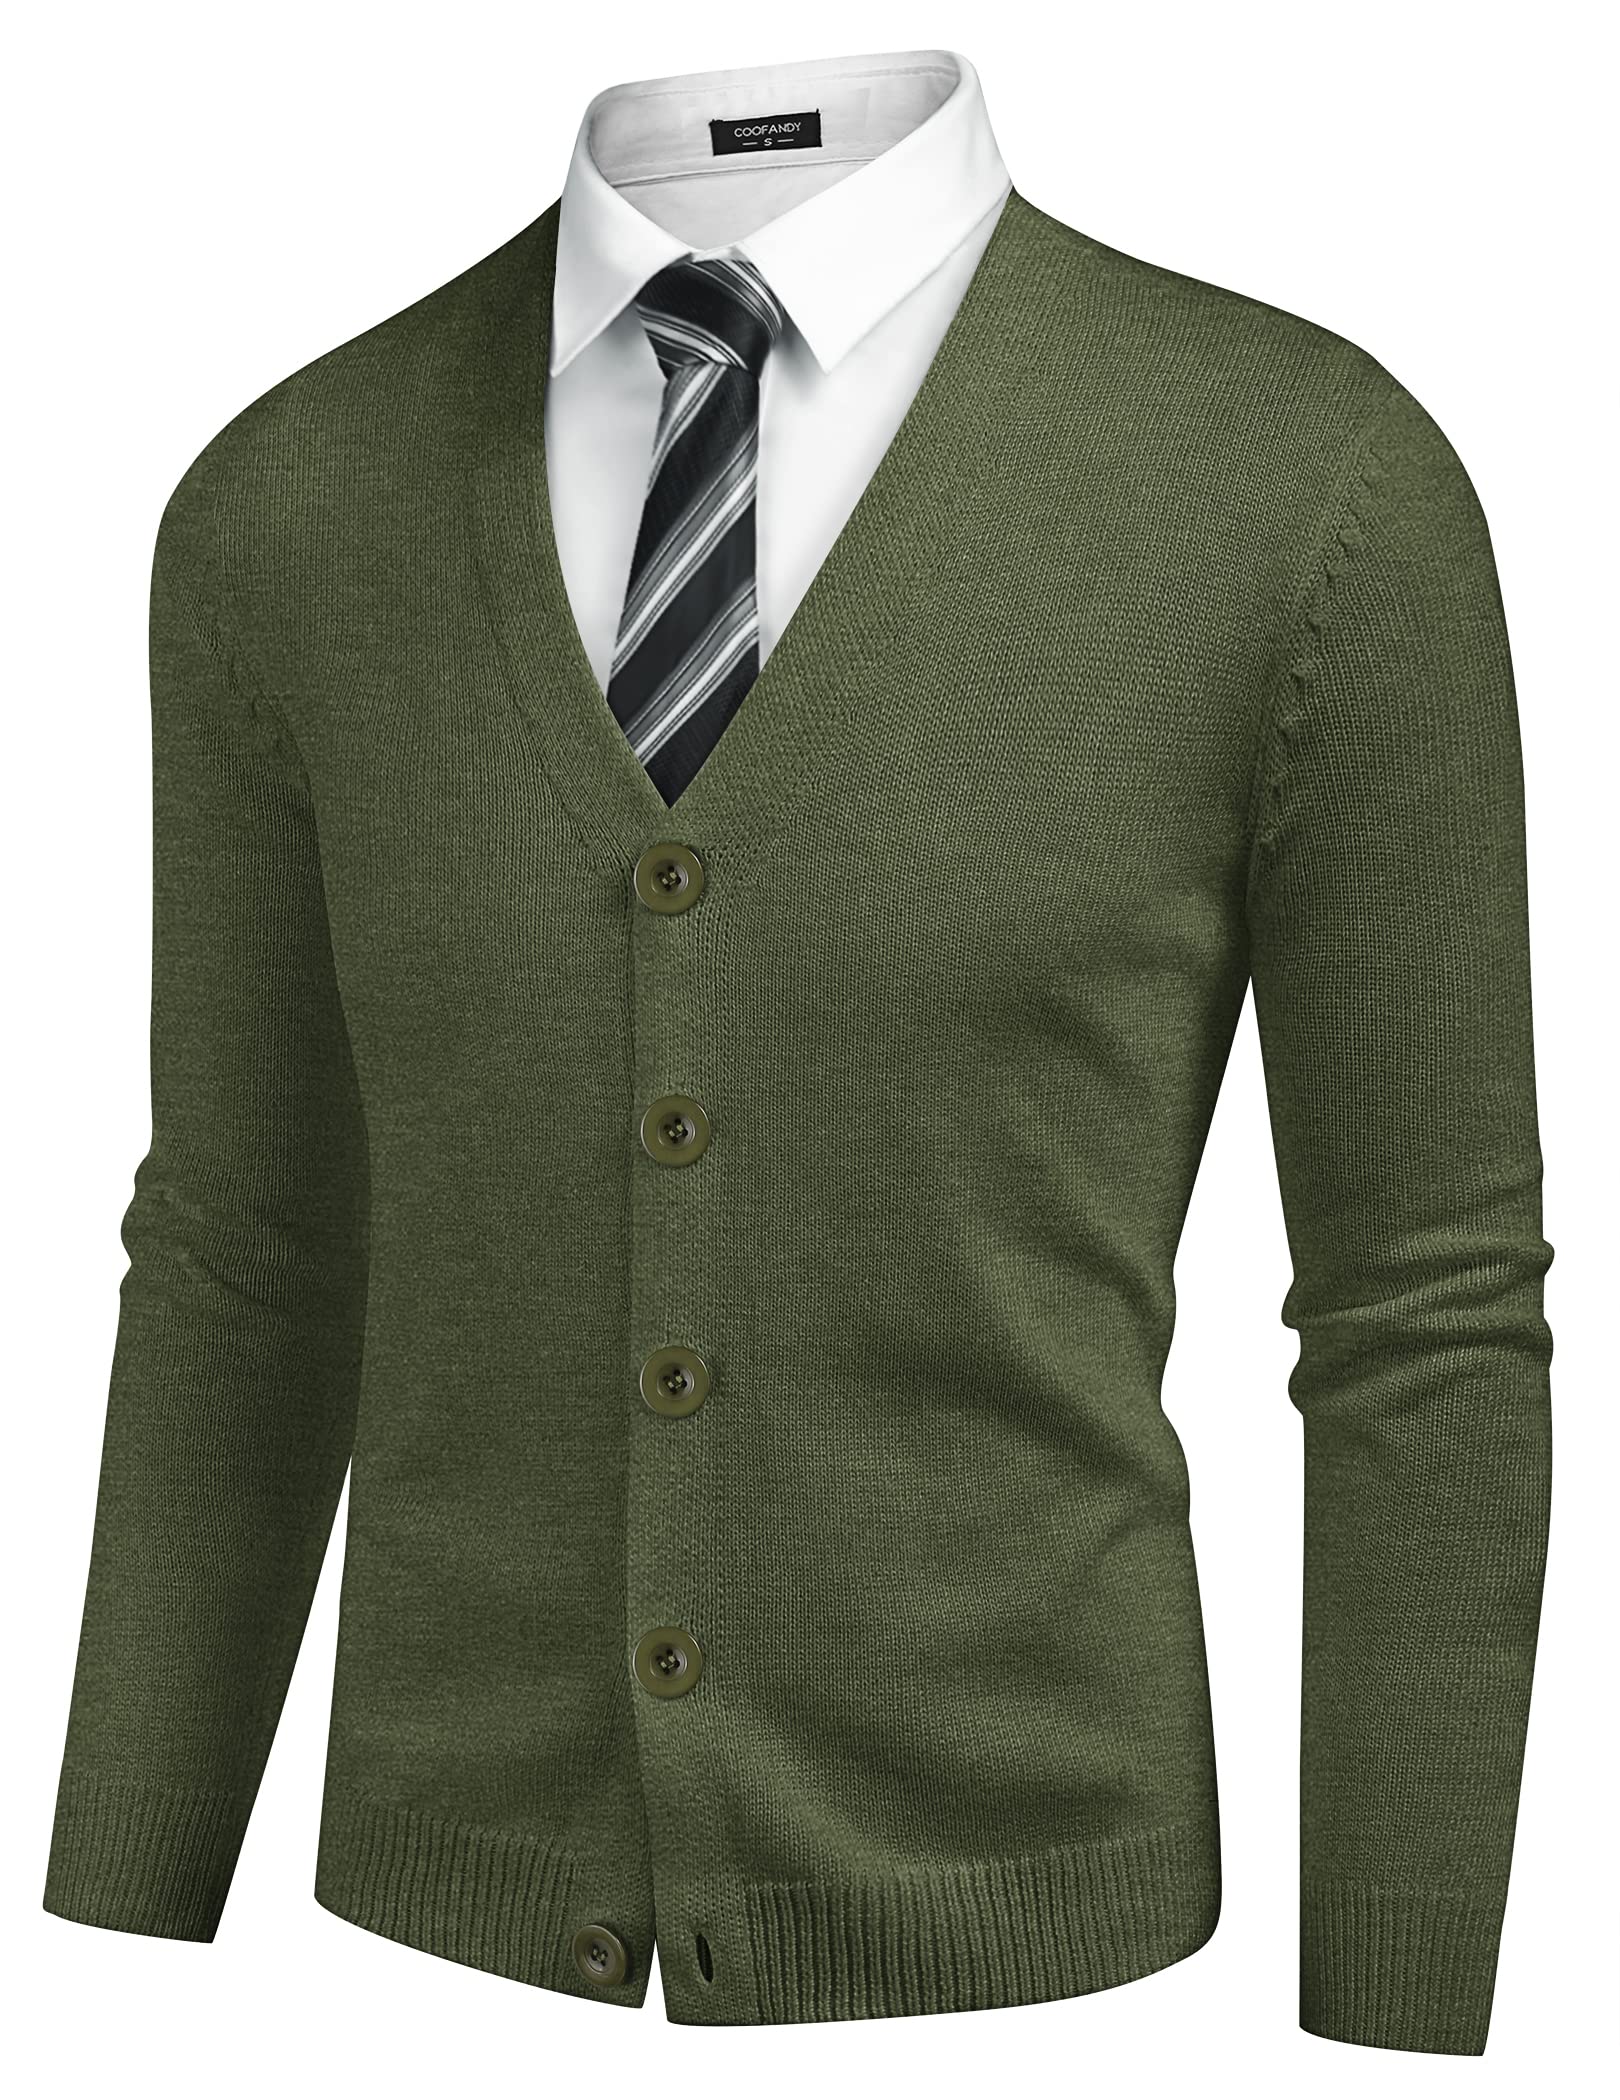 Lightweight cardigan sweaters is an essential part of any man's wardrobe, particularly during transitional seasons or as a layering piece in cooler climates.